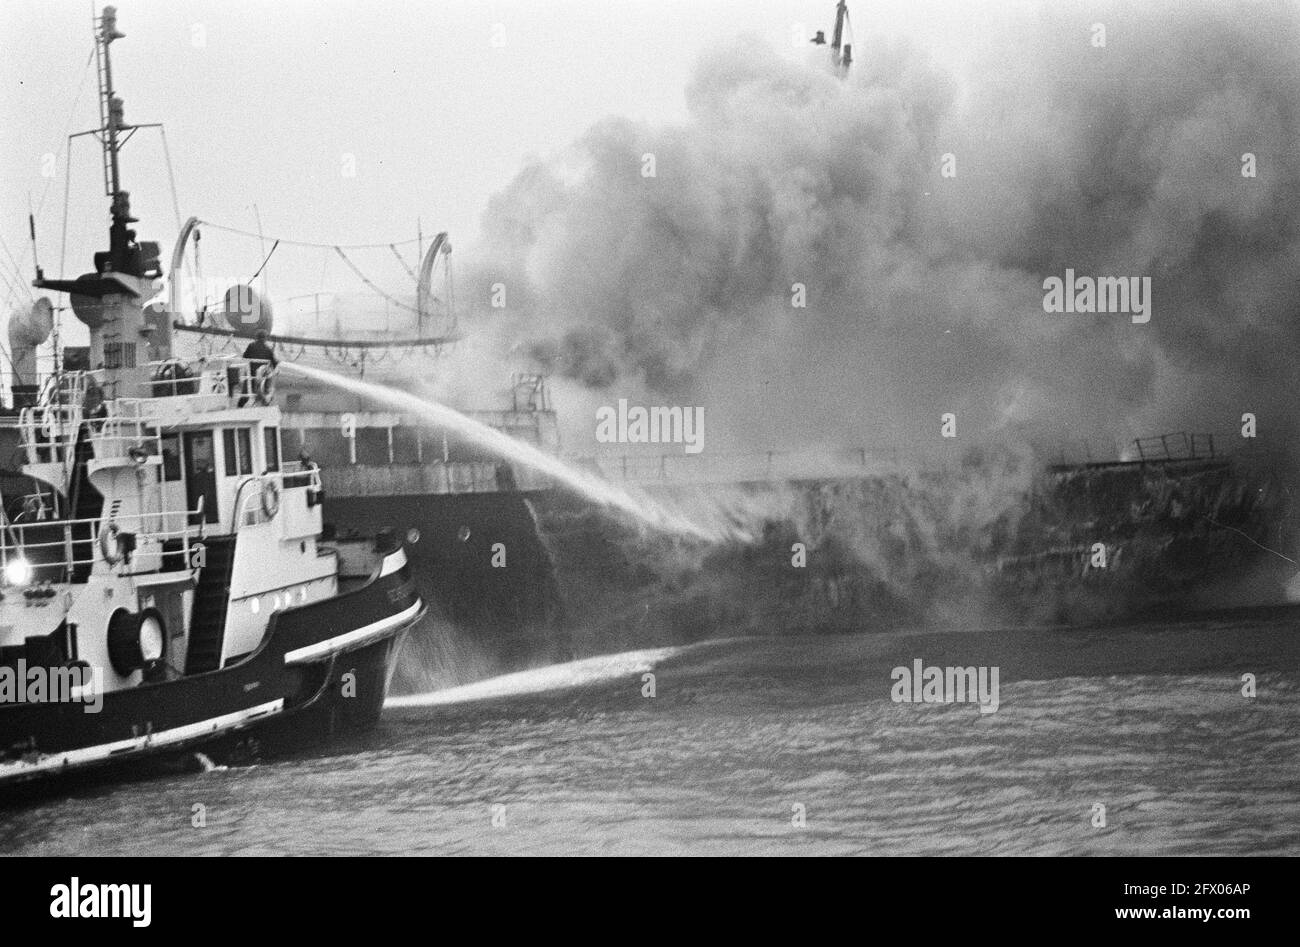 Ship South America on fire at sea, five miles offshore near Hook of Holland (fire on aft deck), February 11, 1966, fires, ships, The Netherlands, 20th century press agency photo, news to remember, documentary, historic photography 1945-1990, visual stories, human history of the Twentieth Century, capturing moments in time Stock Photo